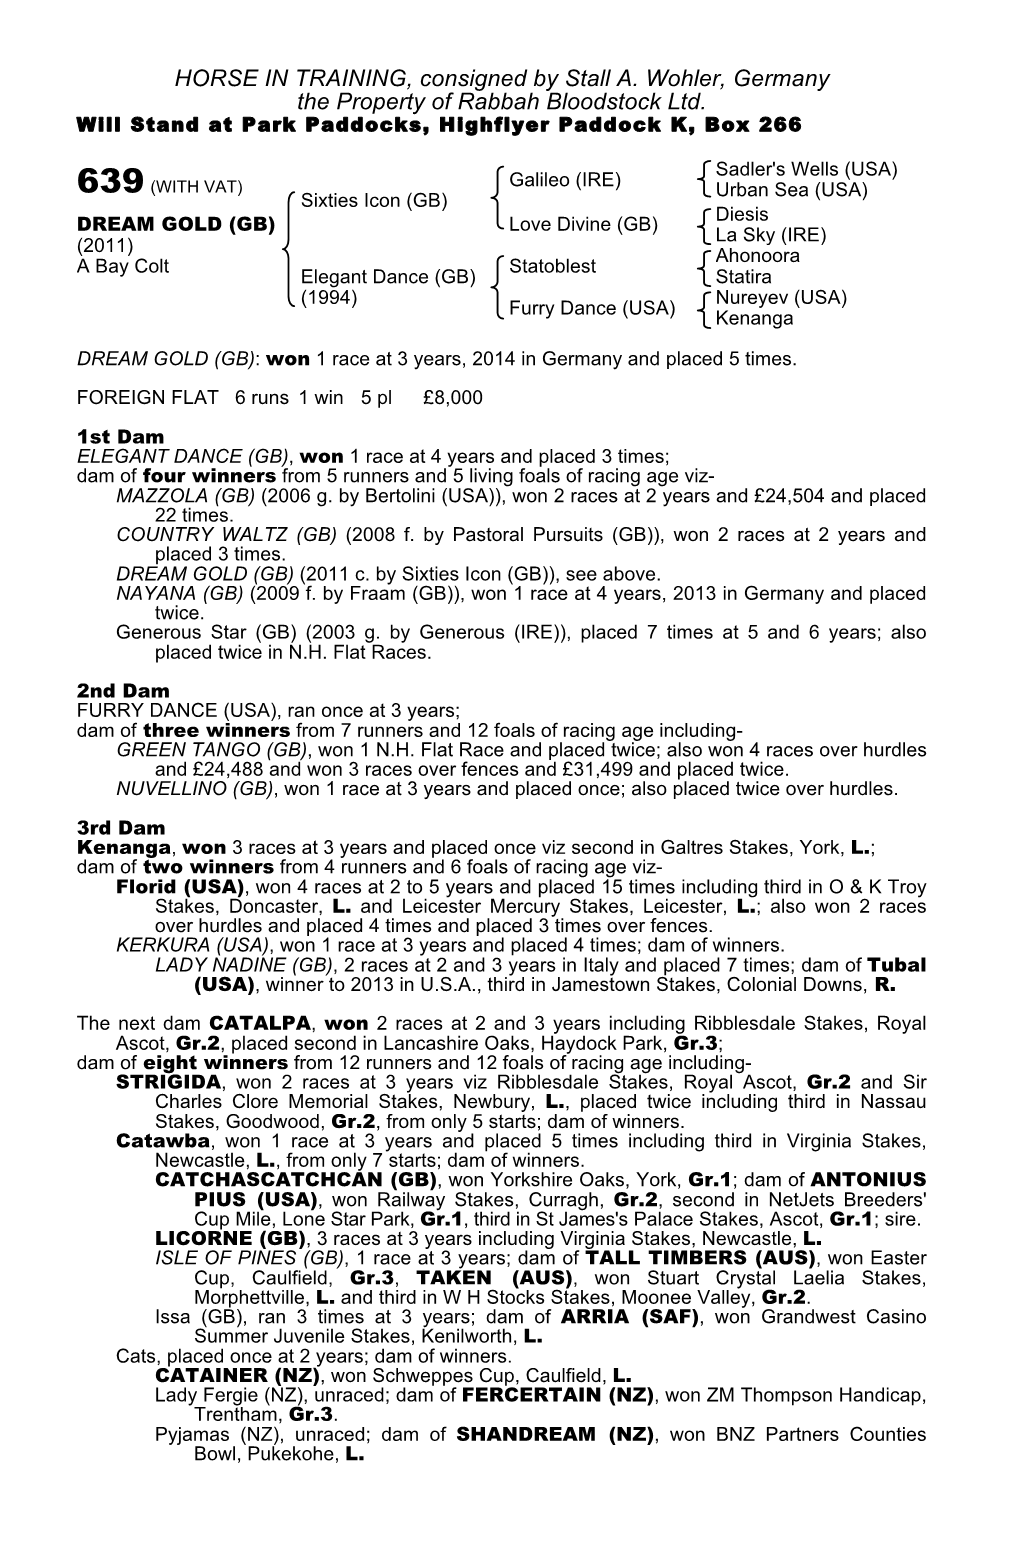 HORSE in TRAINING, Consigned by Stall A. Wohler, Germany the Property of Rabbah Bloodstock Ltd